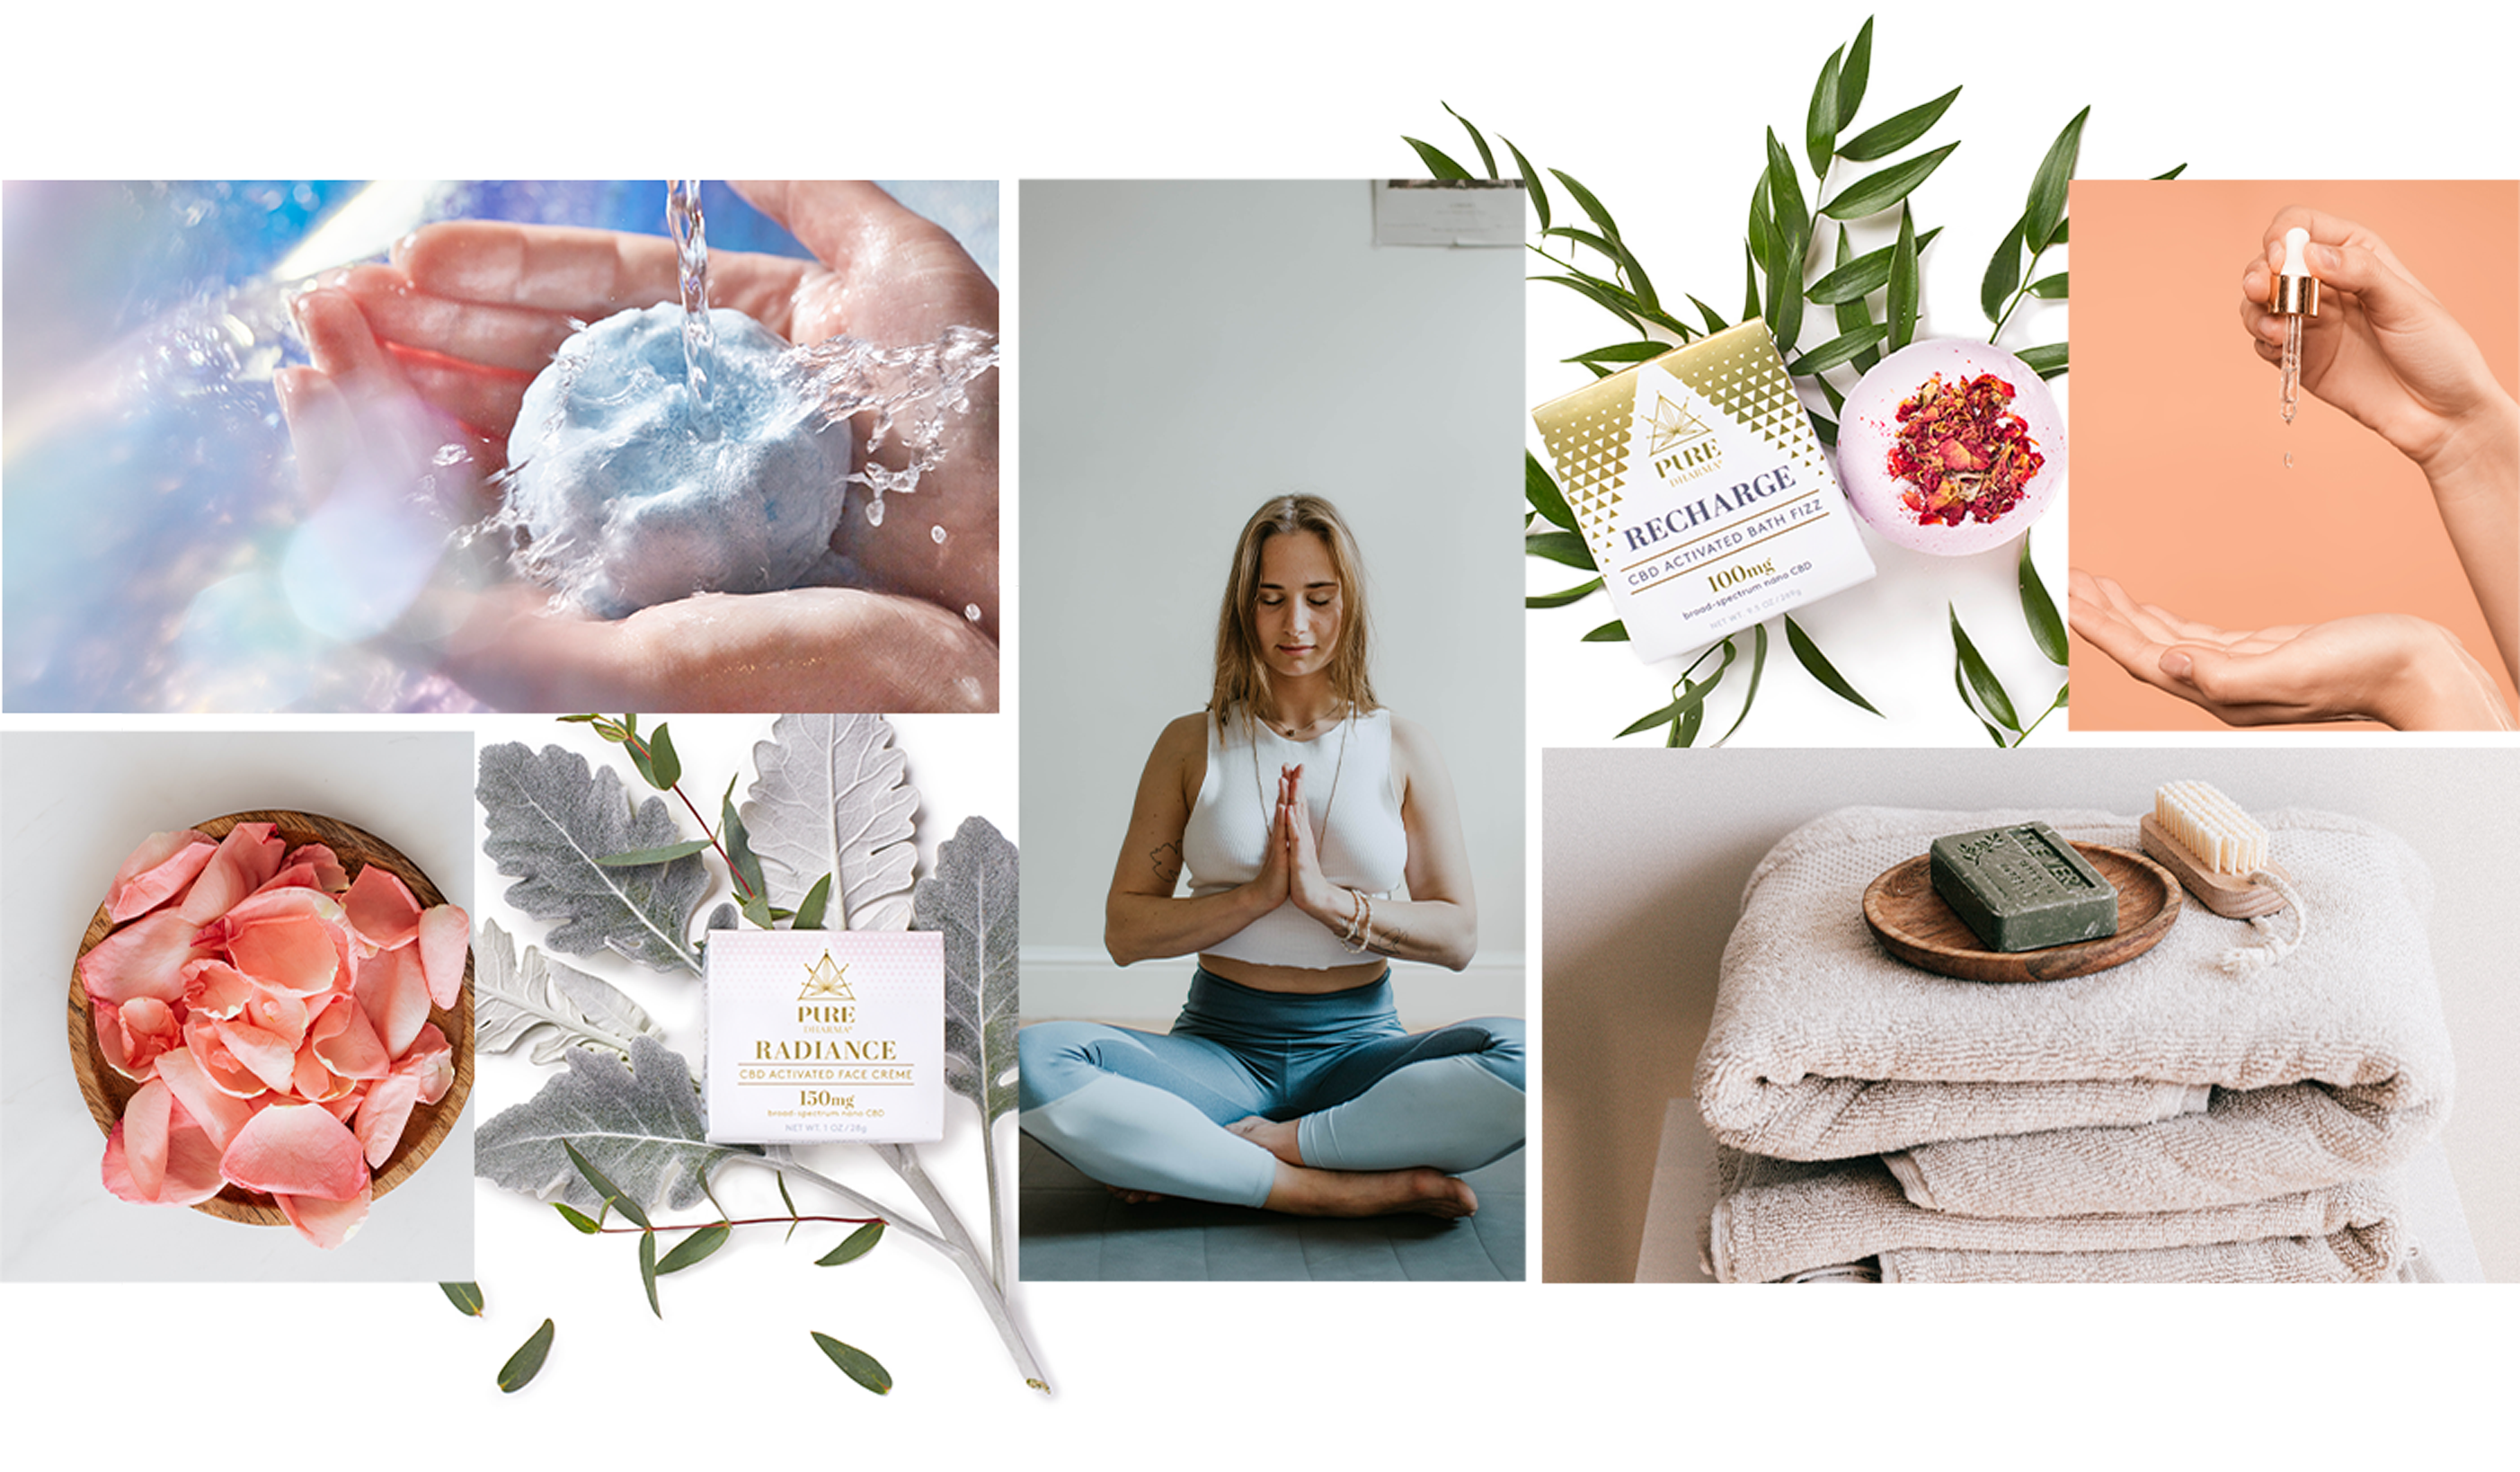 Image Collage Showcasing a Hand Holding a Blue Bath Fizz, Pink Rose Petals in a Wooden Bowl, a Woman doing Yoga, Self-Care Products atop a Folded Bath Towel, and Hands Using a Dropper to Dispense an Oil Serum